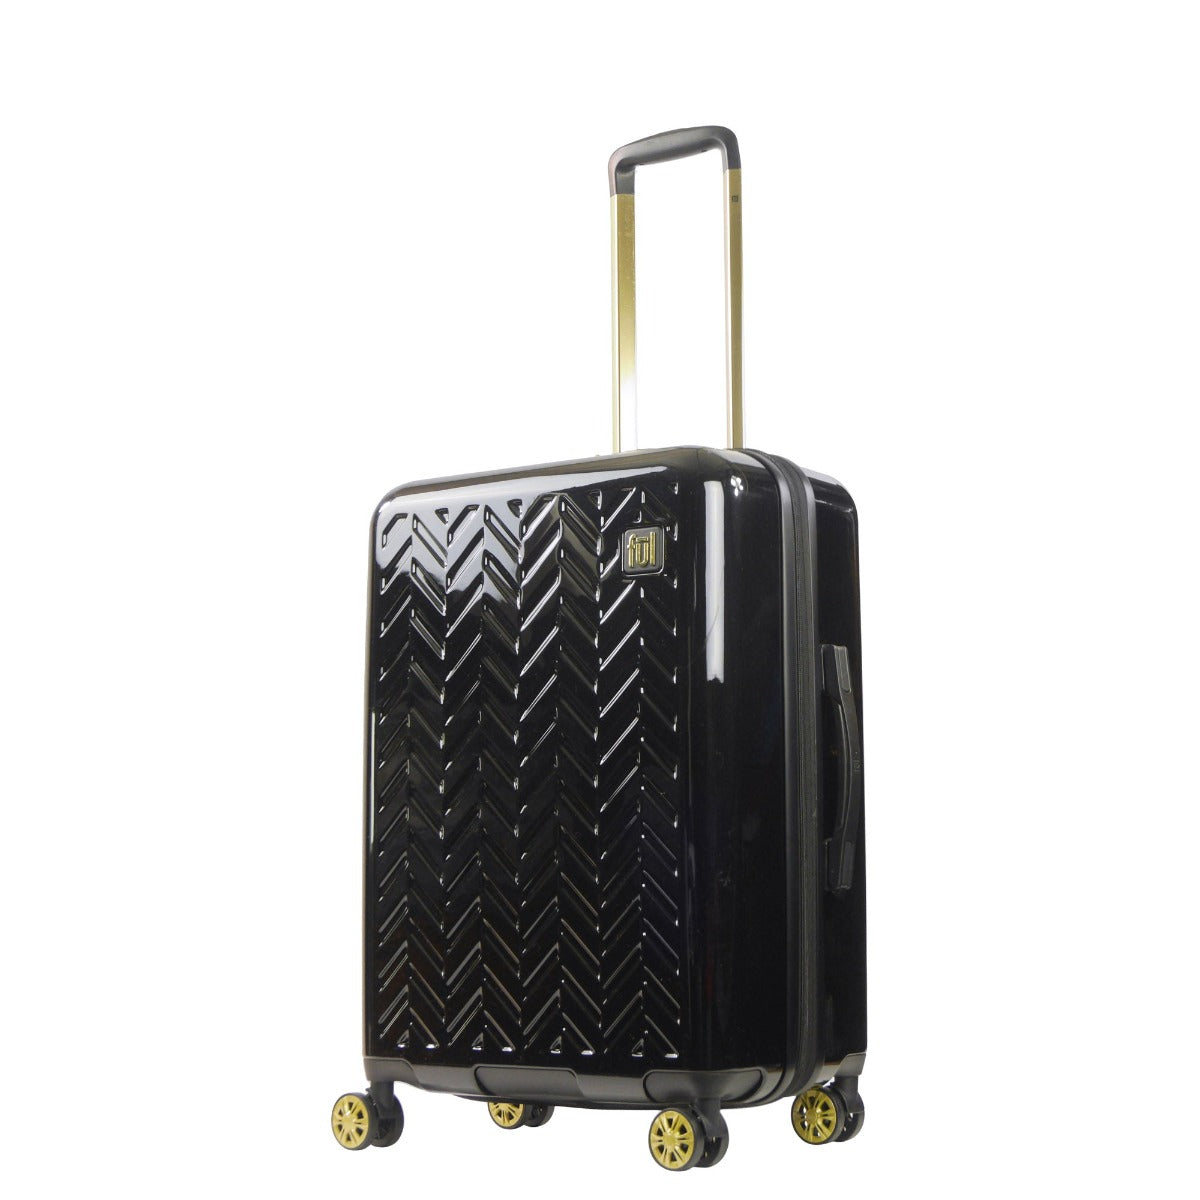 Ful Groove 27" hardside spinner suitcase check-in black luggage gold details